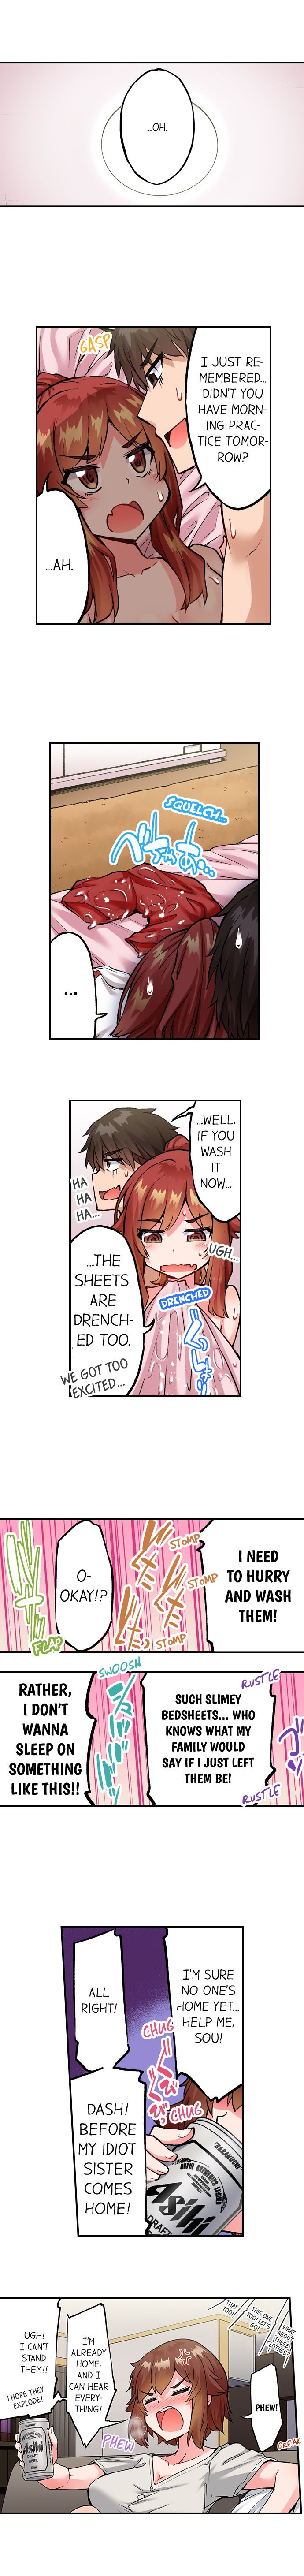 Traditional Job of Washing Girls’ Body - Chapter 172 Page 9